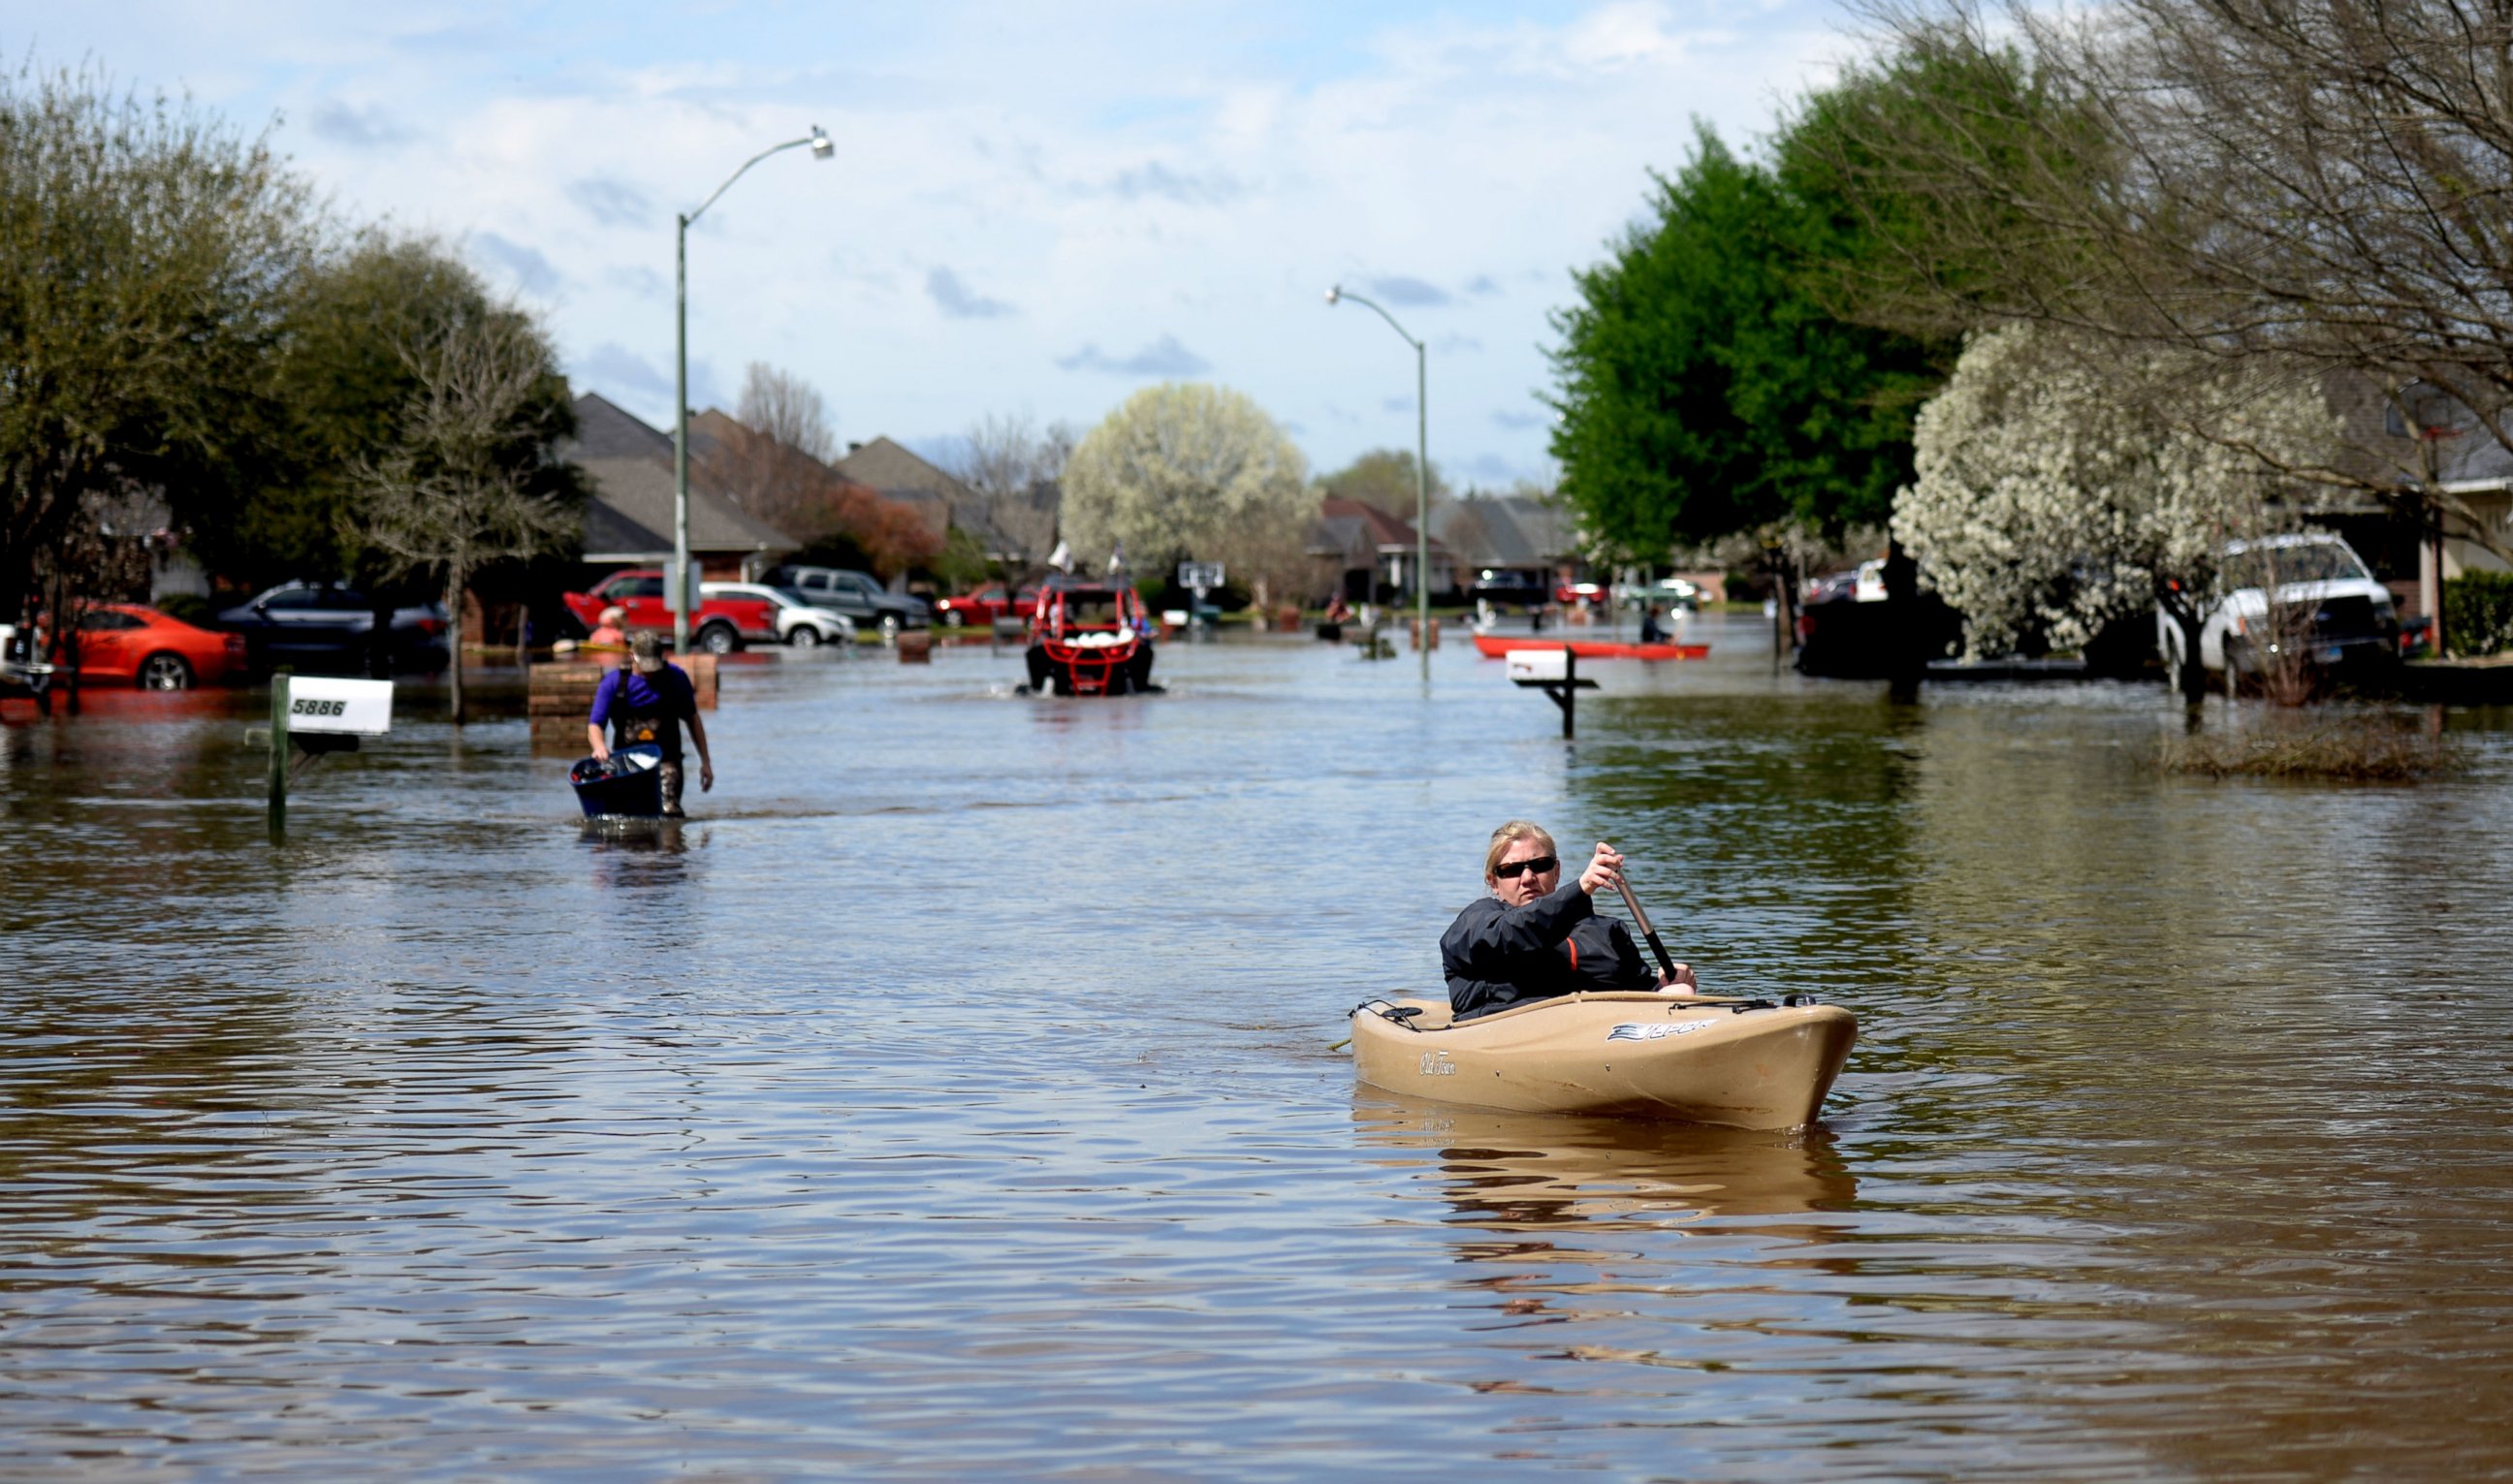 Golden Meadows resident Sabrina Langley canoes to the road to leave the flooded subdivision in Bossier Parish, La., March 10, 2016.